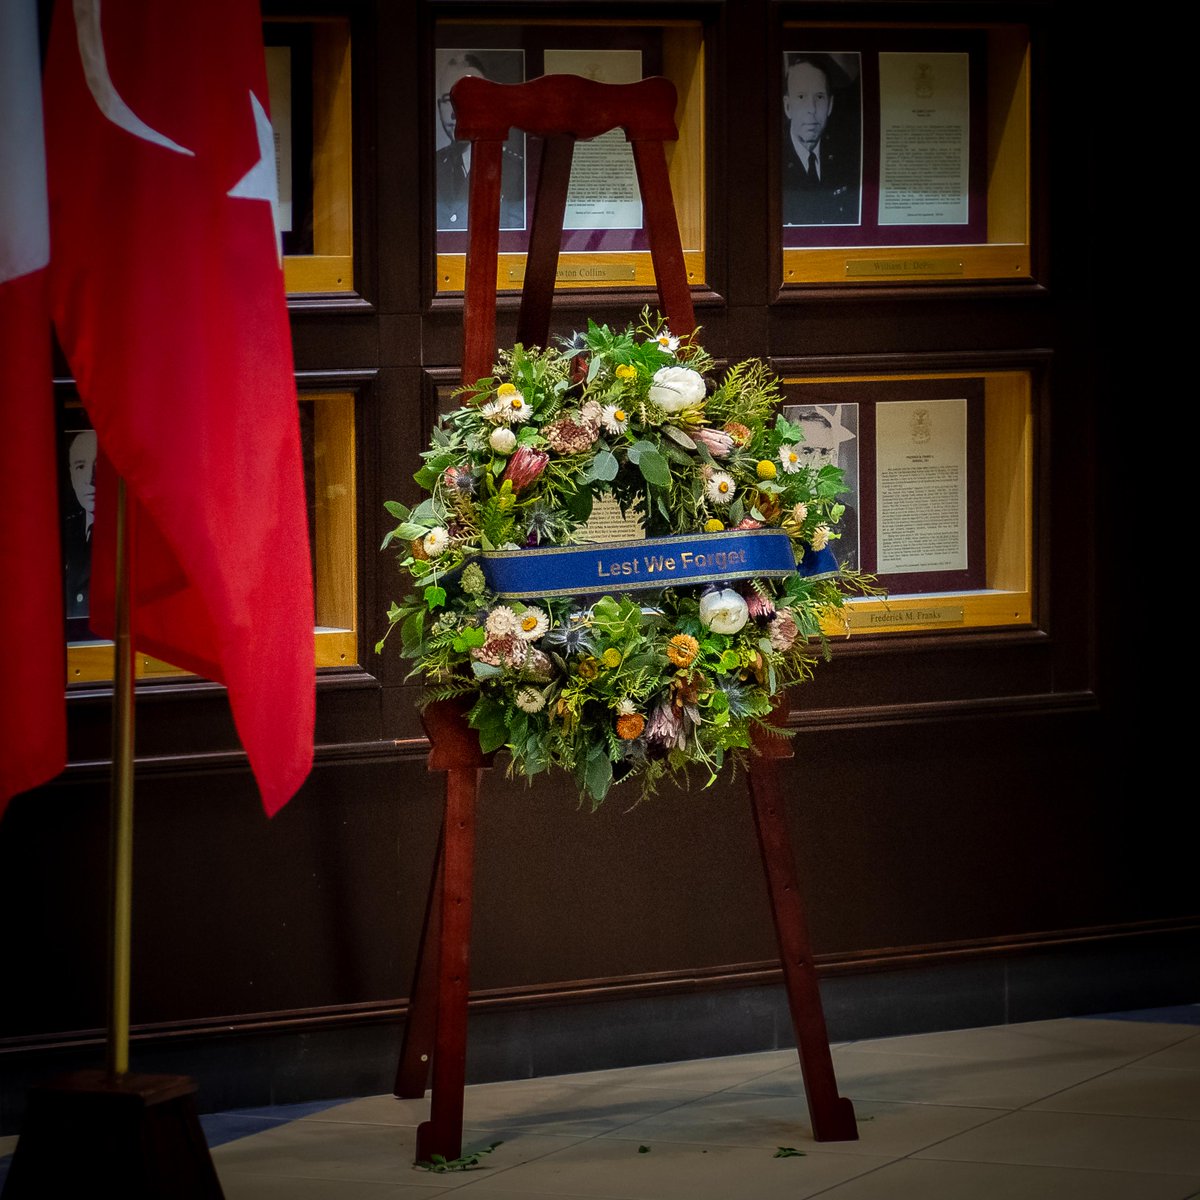 Lest We Forget The ArmyUniversity hosted an ANZAC Day Commemoration at dawn honoring Australian and New Zealand Soldiers who died in service. The event also highlights ANZAC efforts at the Gallipoli Peninsula in 1915 against Ottoman forces. usacac TRADOC Beags_Beagle